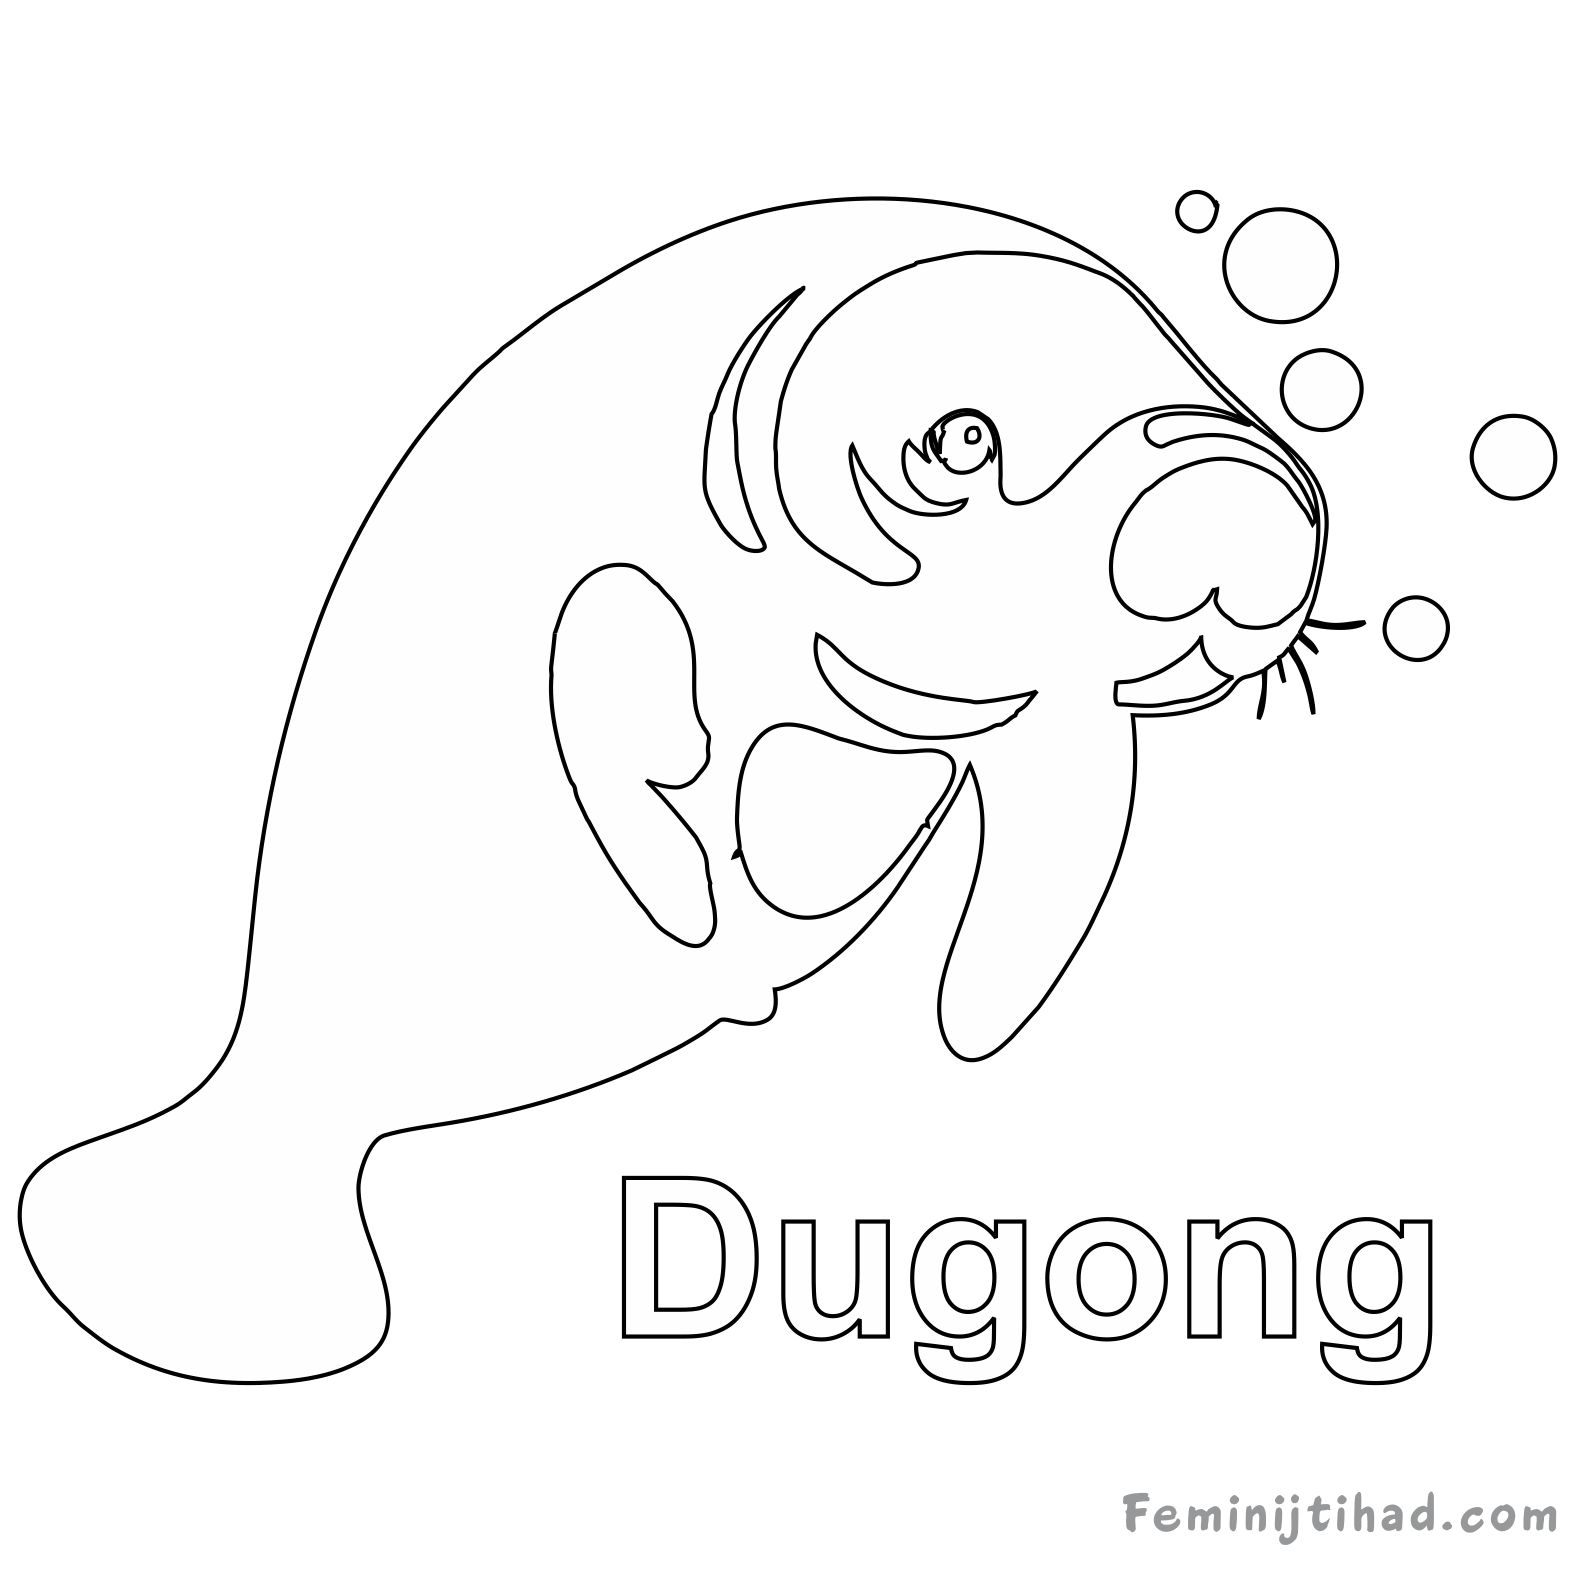 coloring page of dugong free